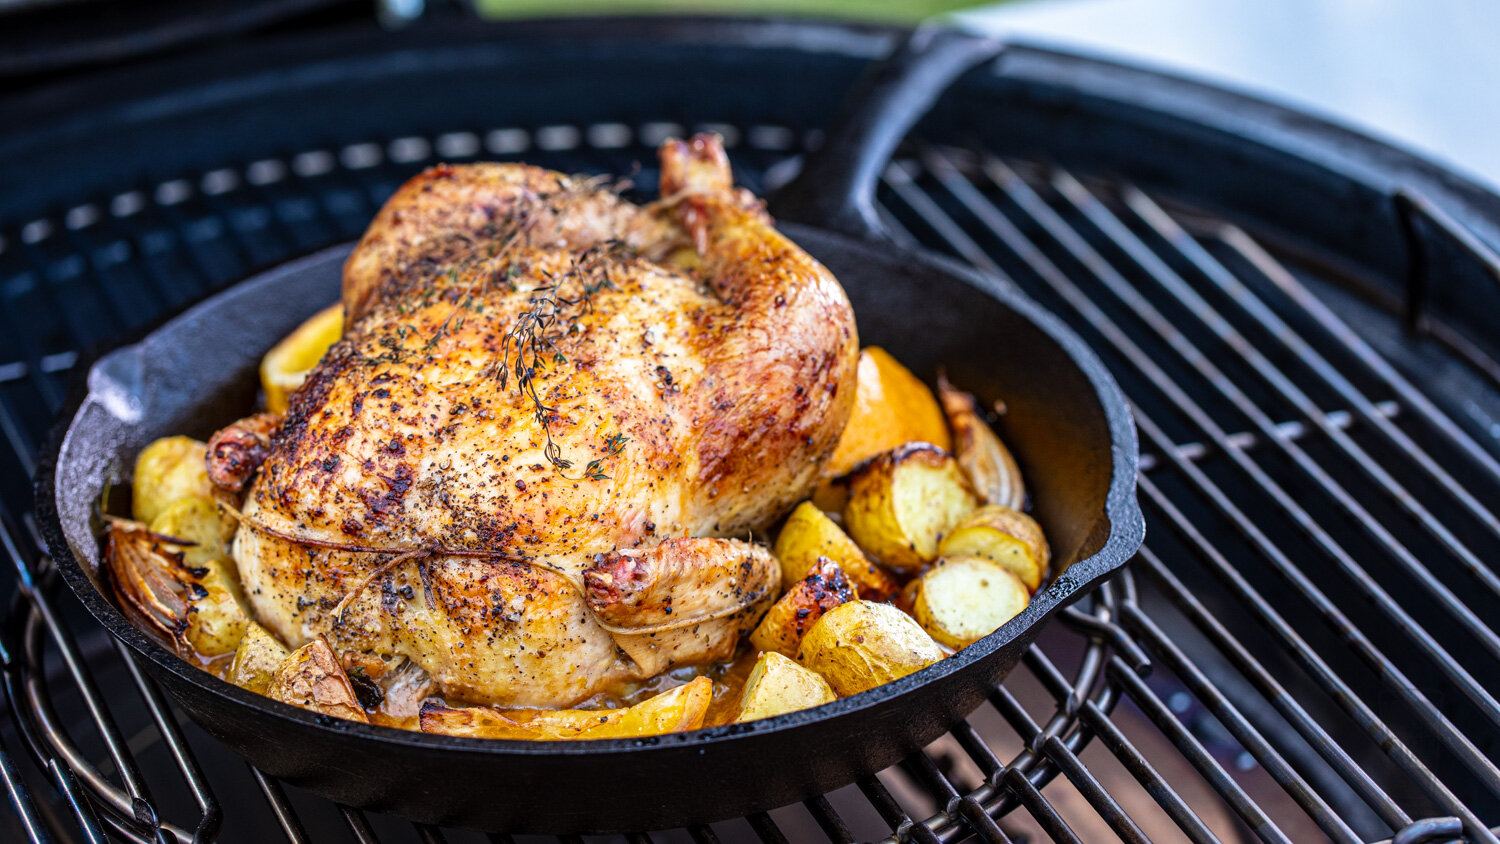 Cast-Iron Skillet Grilled Chicken: Video — Another Pint Please